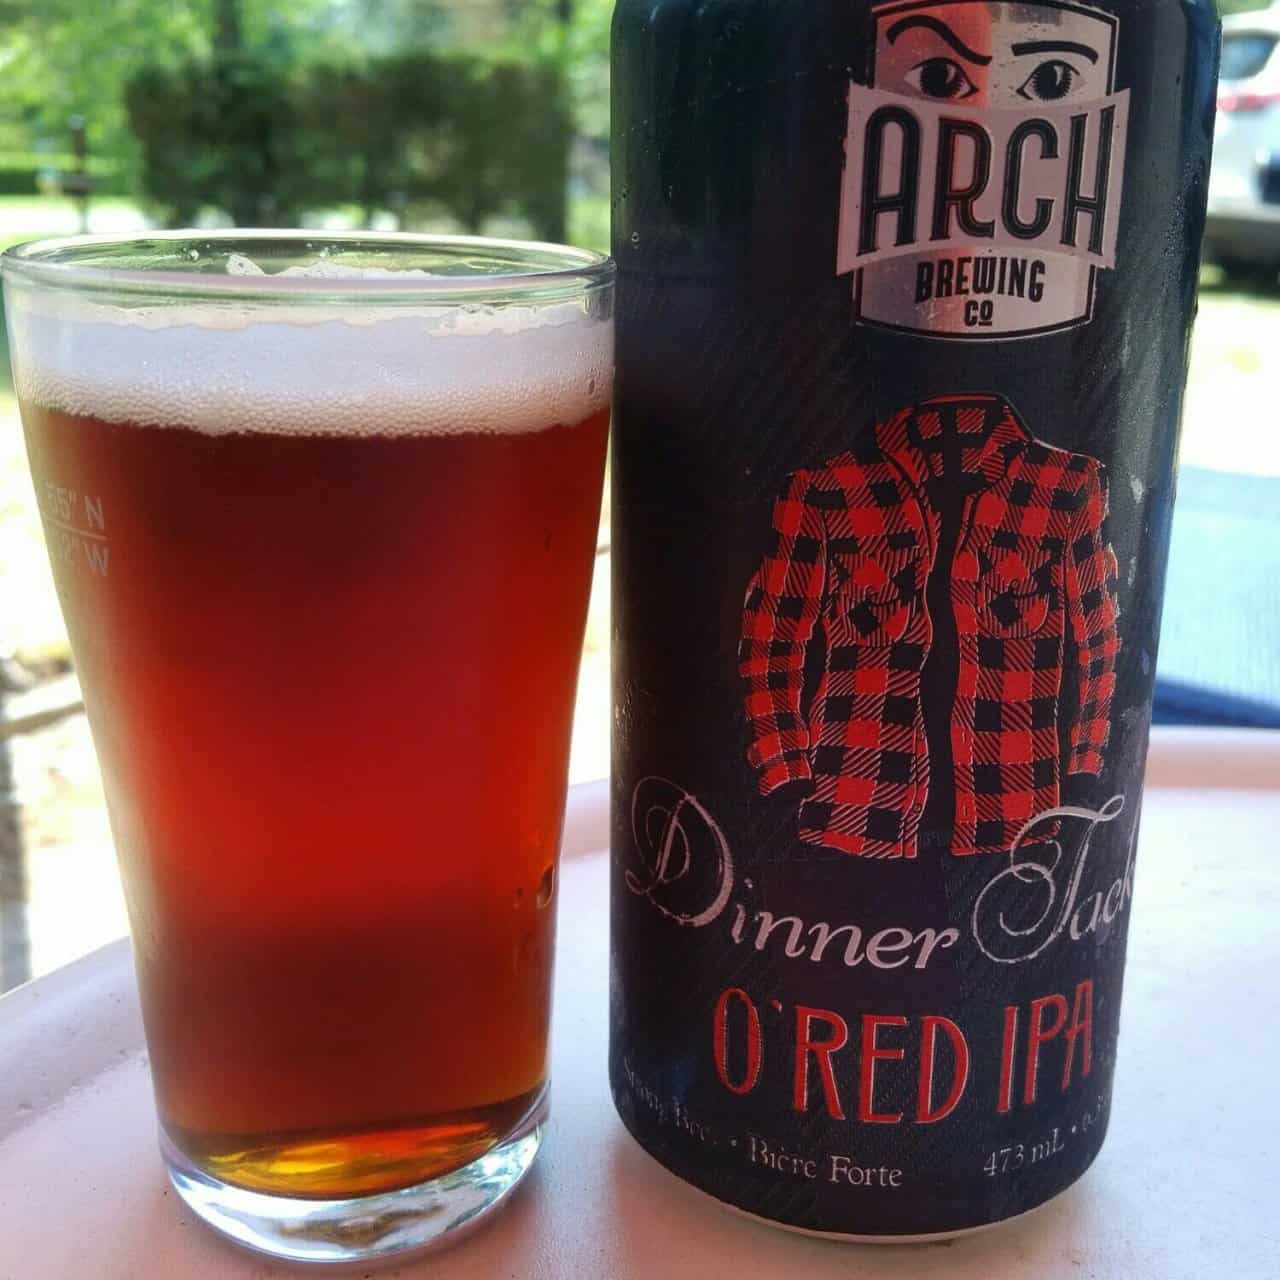 Dinner Jacket O’Red IPA